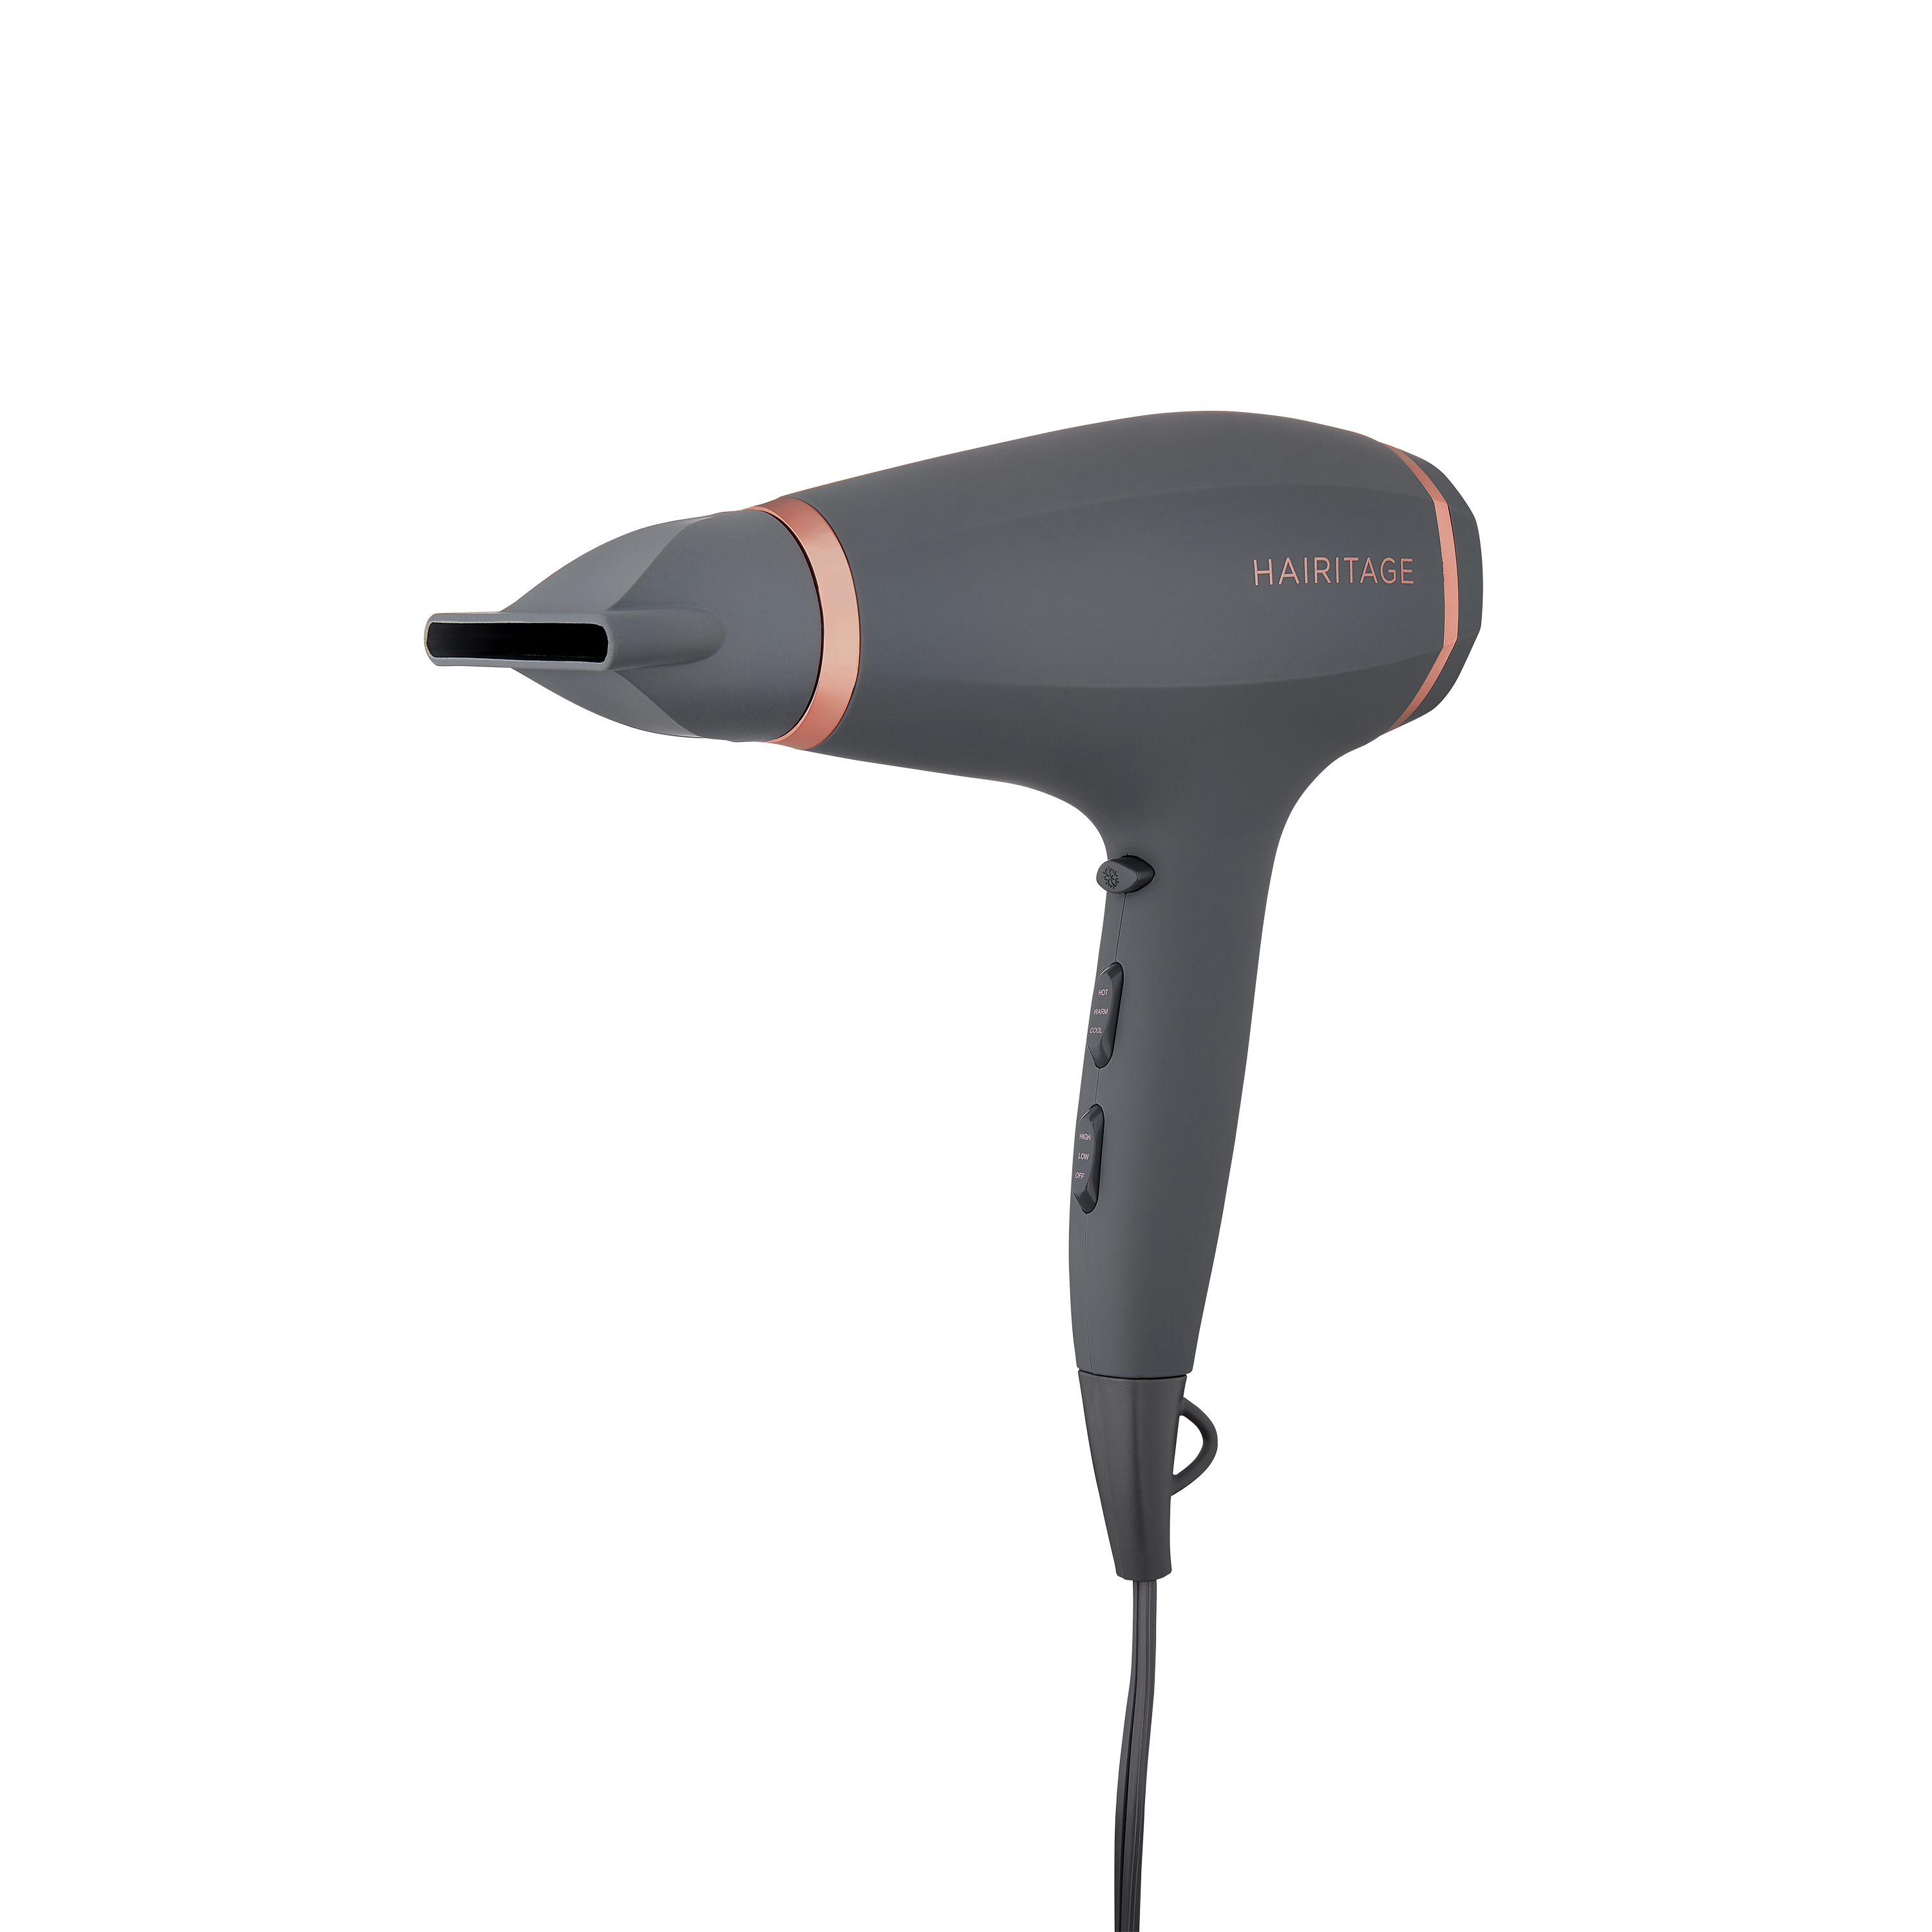 Hairitage Comin' In Hot Hair Dryer |1875 Watts Ionic Hair Dryer for Frizz Control & Shine | Powerful Blow Dryer for All Hair Types - image 3 of 7